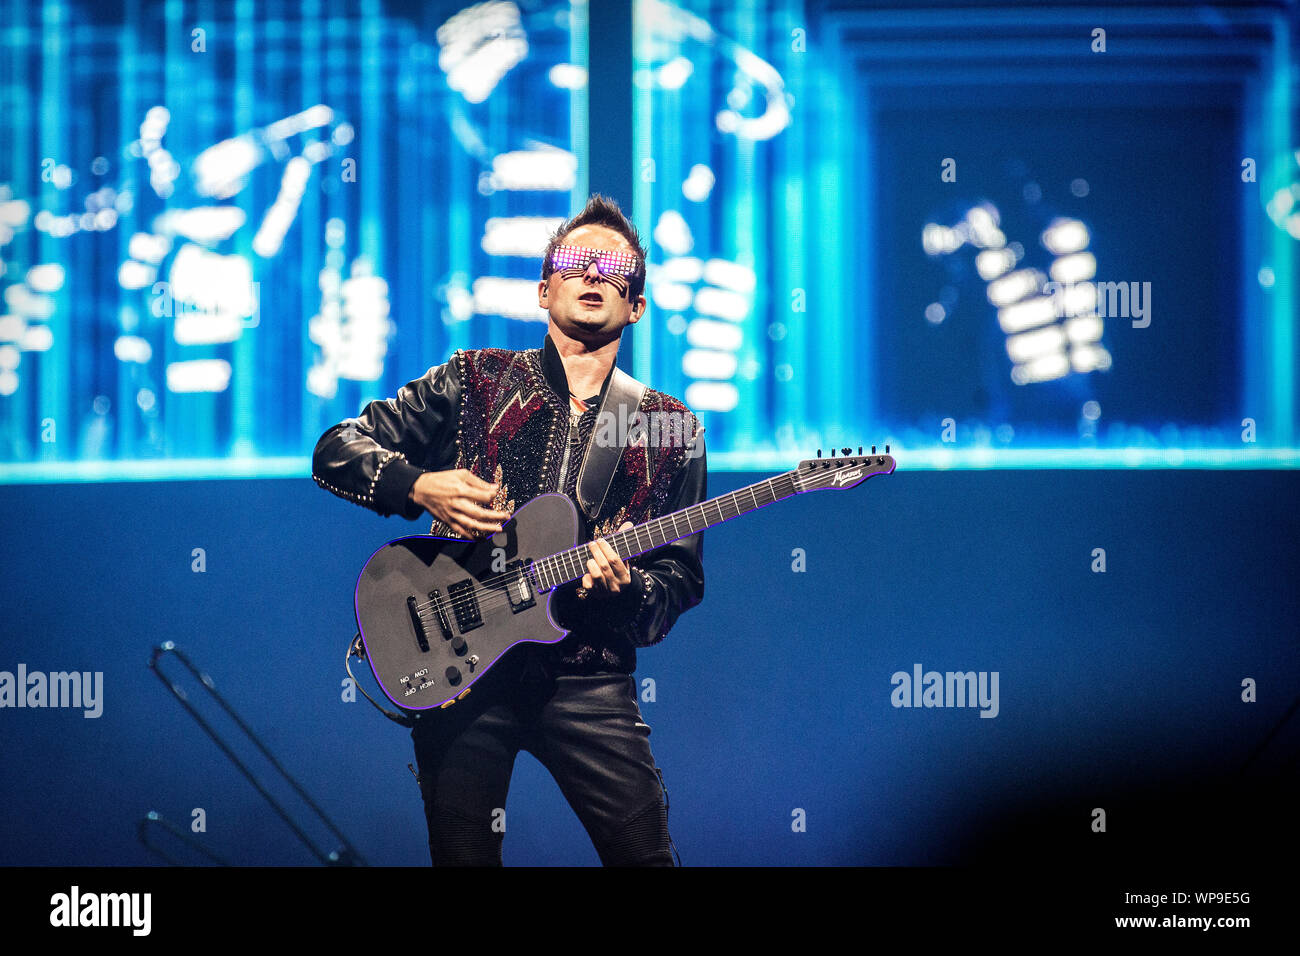 Oslo, Norway. 7th, September 2019. The English rock band Muse performs a live concert at Telenor Arena in Oslo. Here singer, songwriter and musician Matthew Bellamy is seen live on stage. (Photo credit: Gonzales Photo - Terje Dokken). Stock Photo